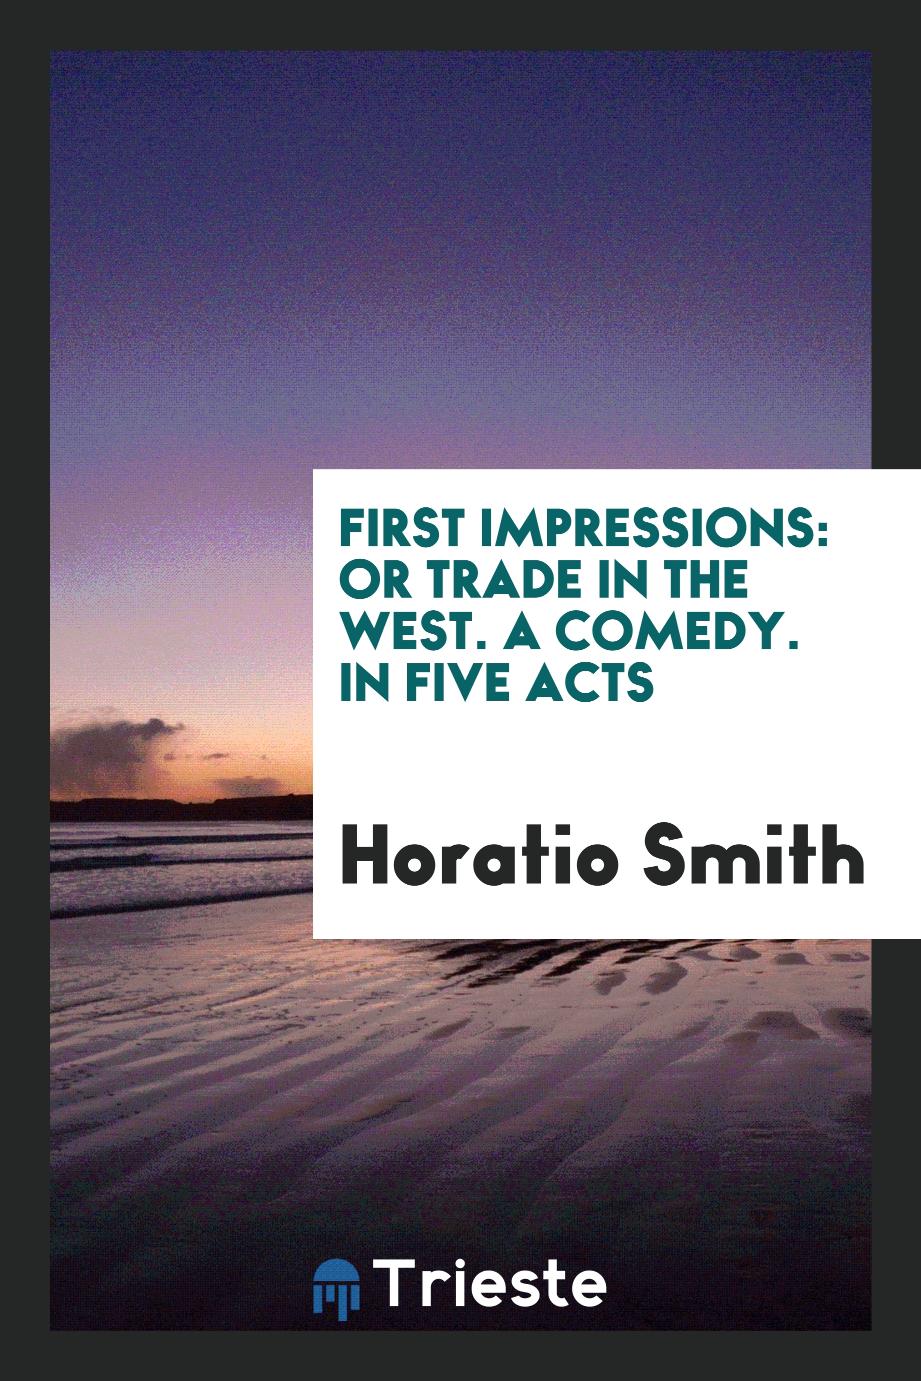 First Impressions: Or Trade in the West. A comedy. In Five Acts